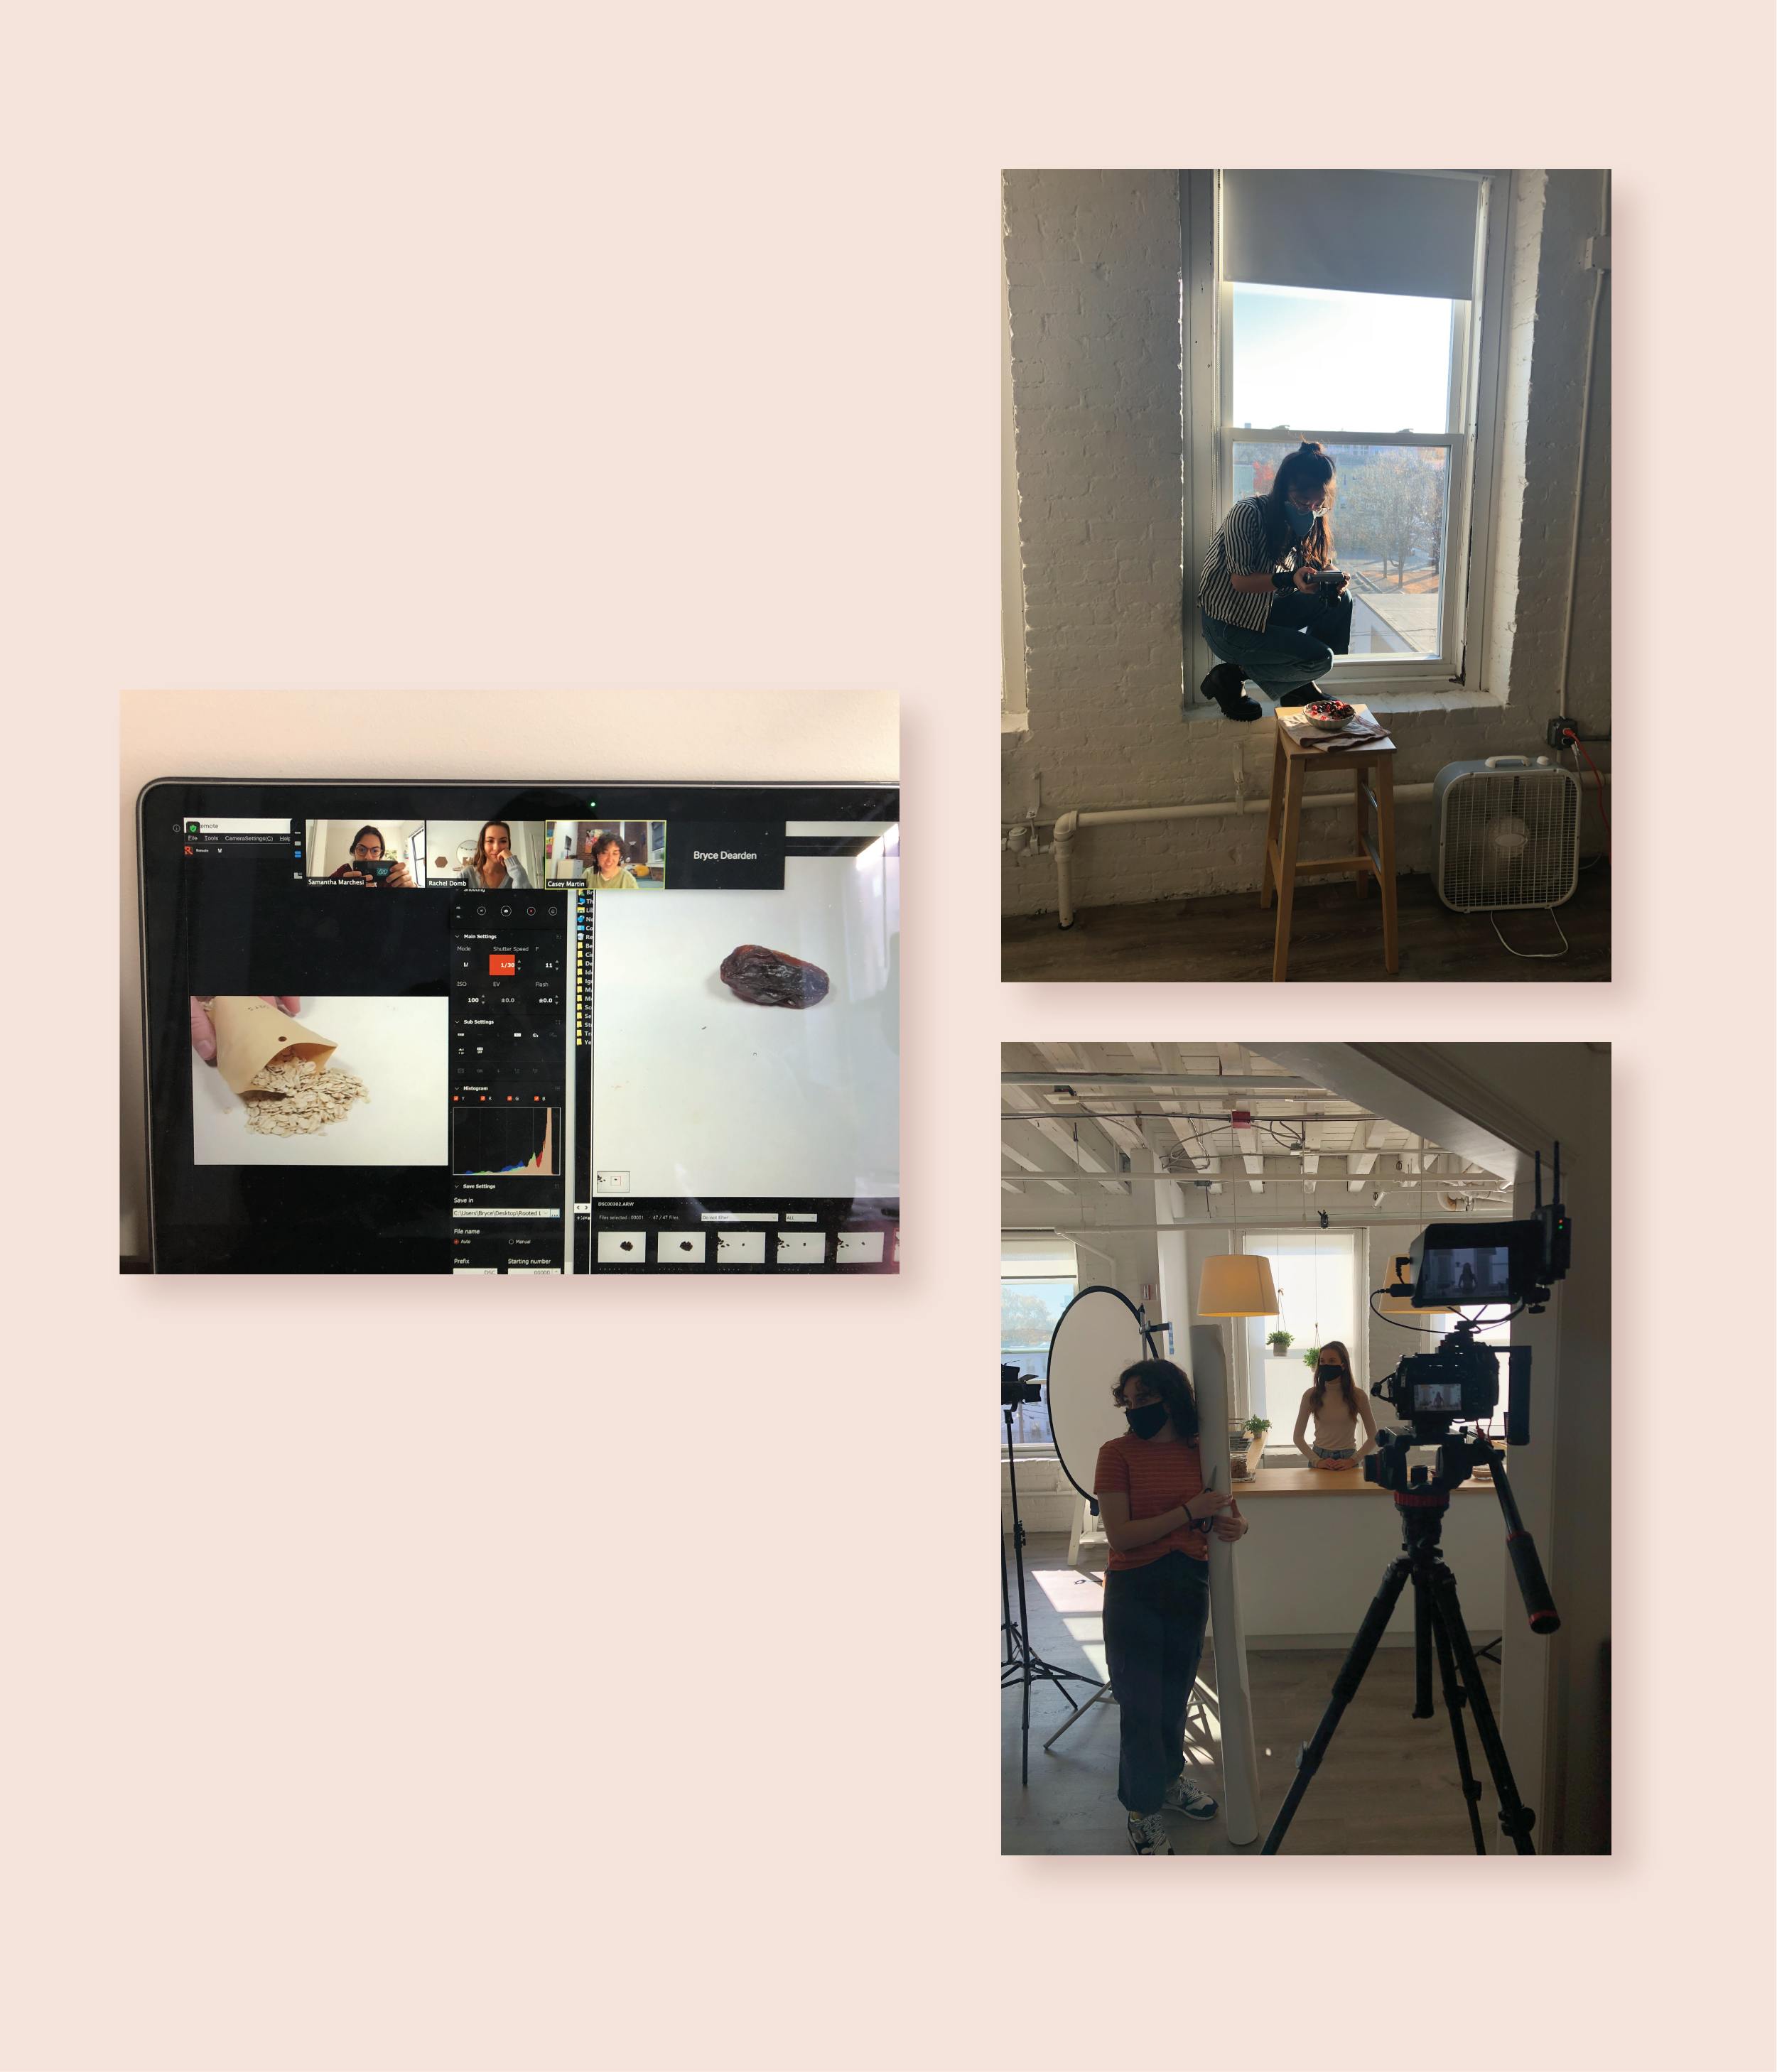 Three images of the production setup, where they are photographing granola